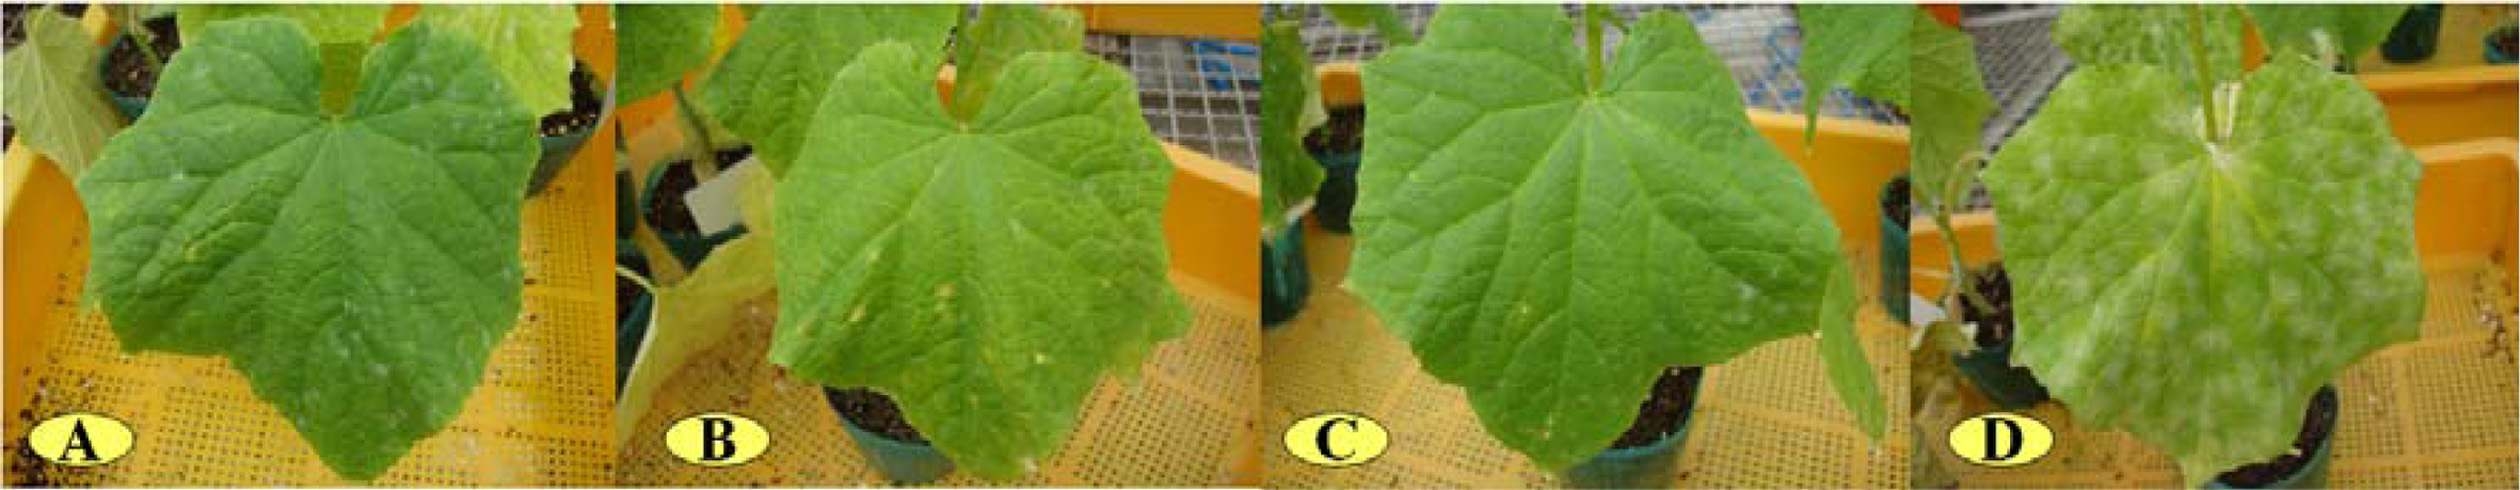 Preventive effect of selected isolates against cucumber powdery mildew in the greenhouse. A, 434; B, M27; C, CC178; D, control.